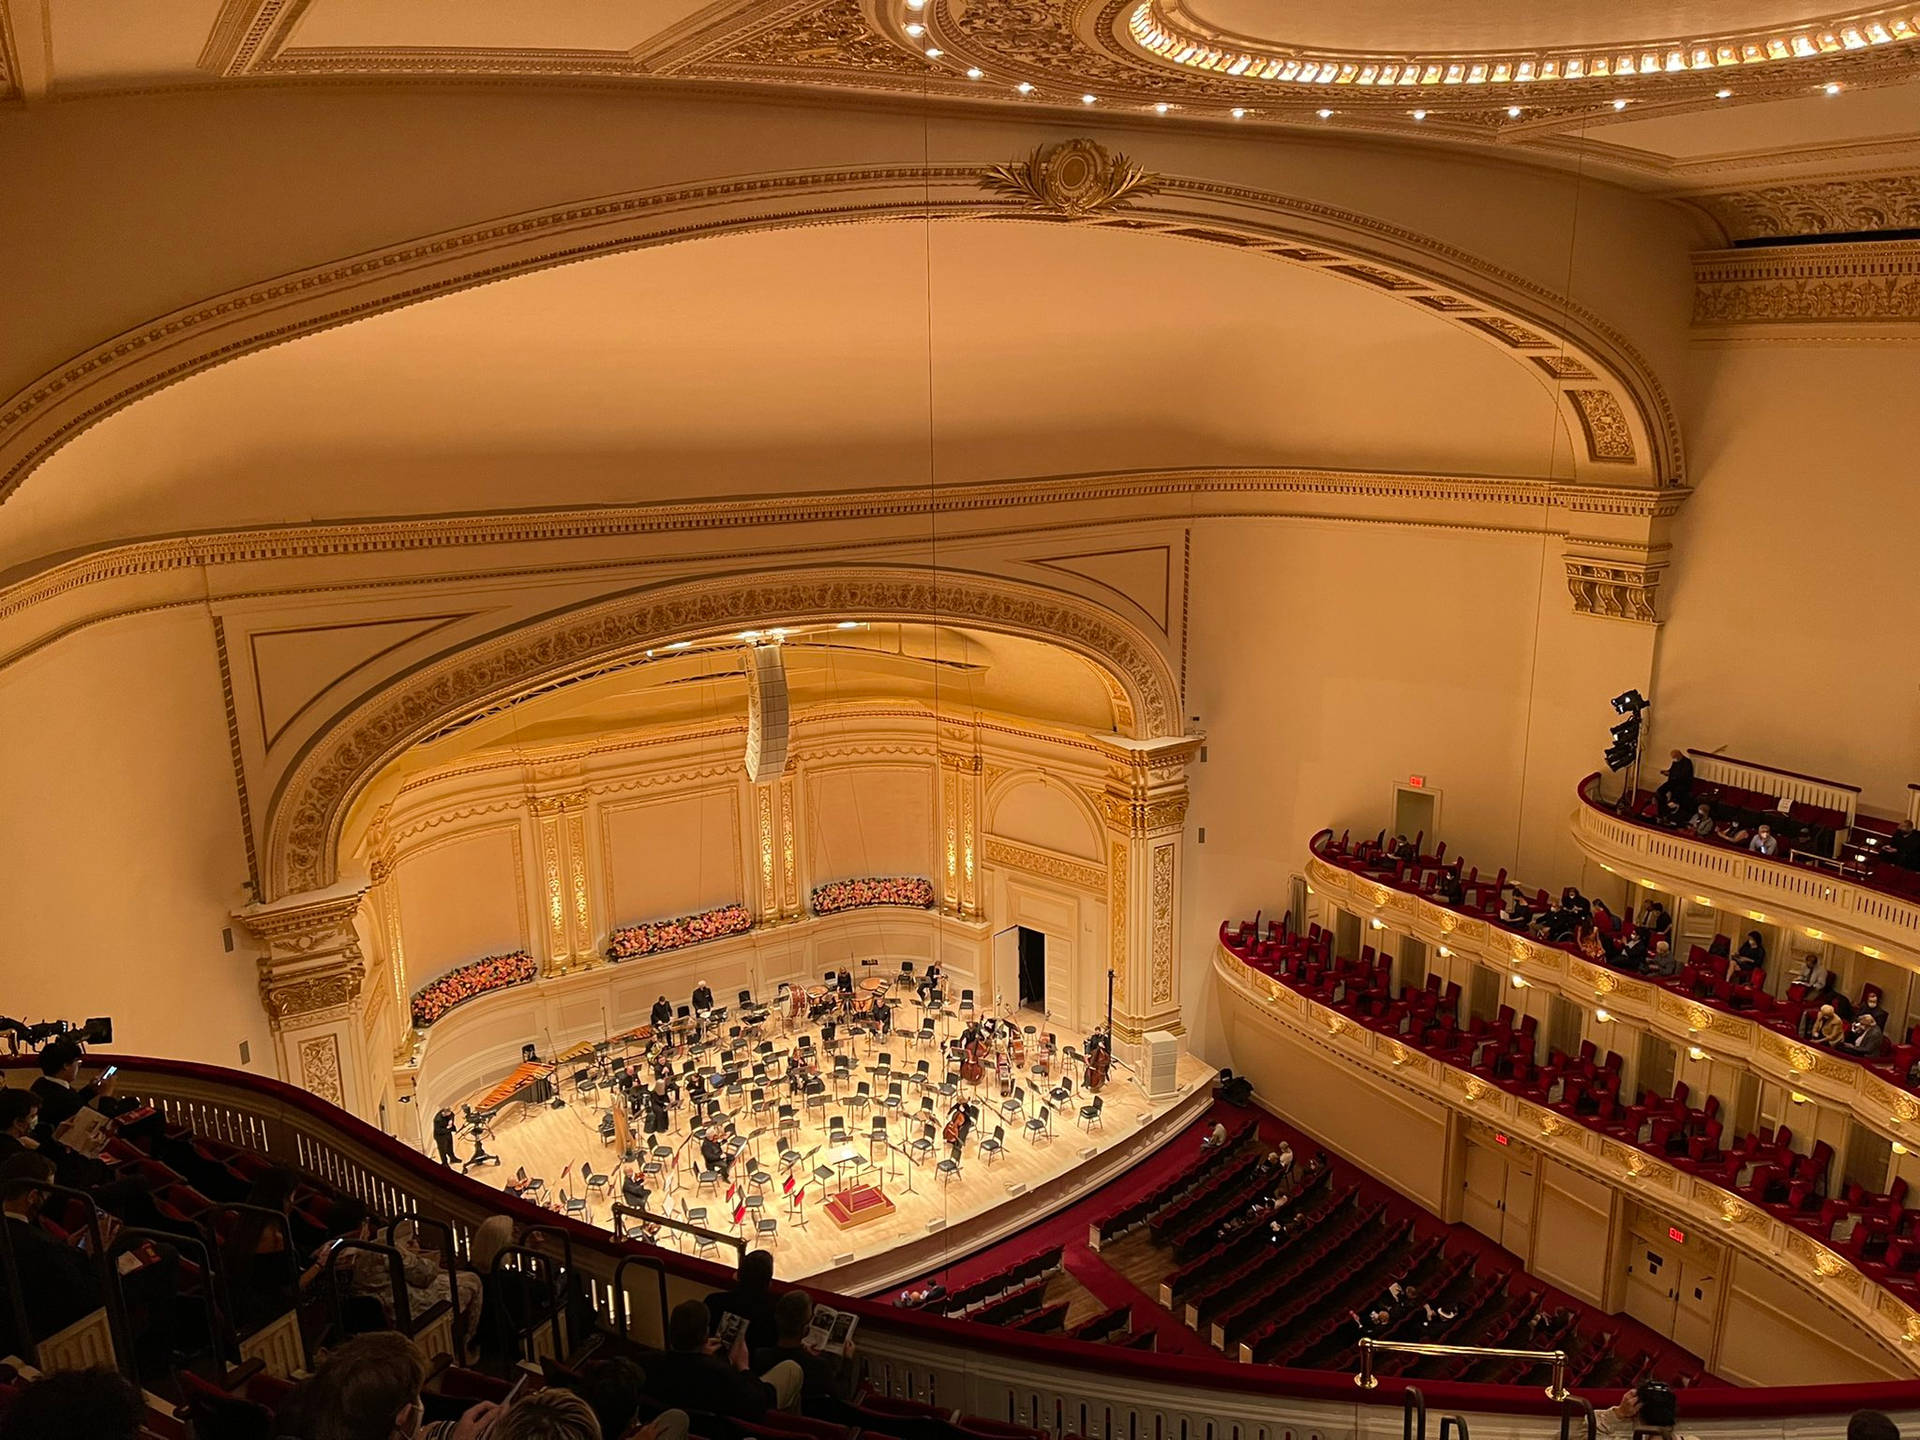 Orchestra On Stage Carnegie Hall Wallpaper